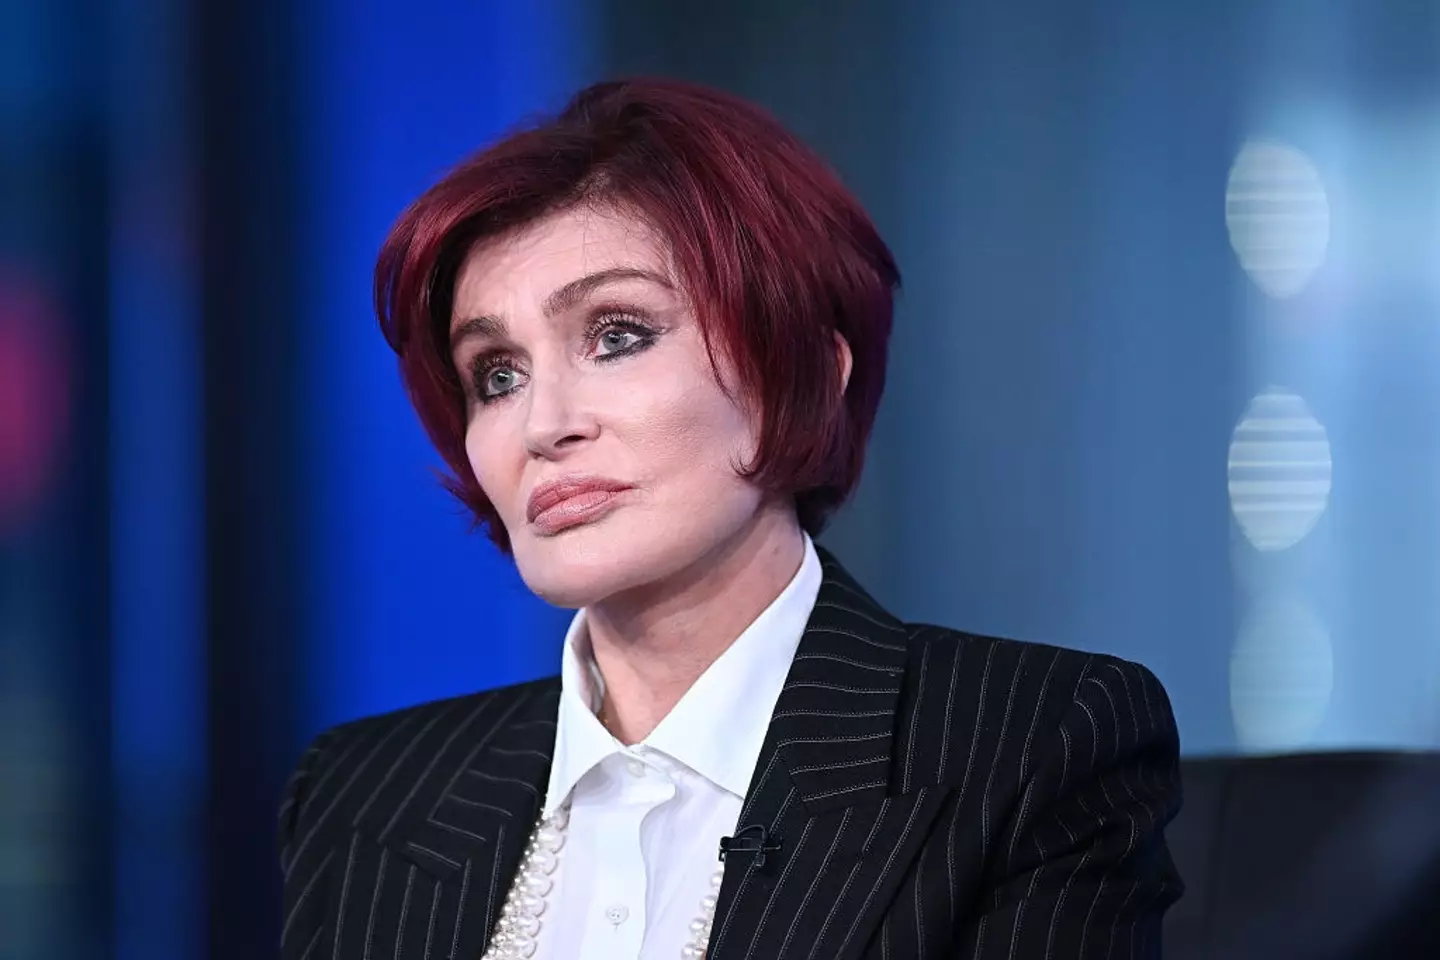 Sharon Osbourne has been candid on her use of Ozempic in the past.